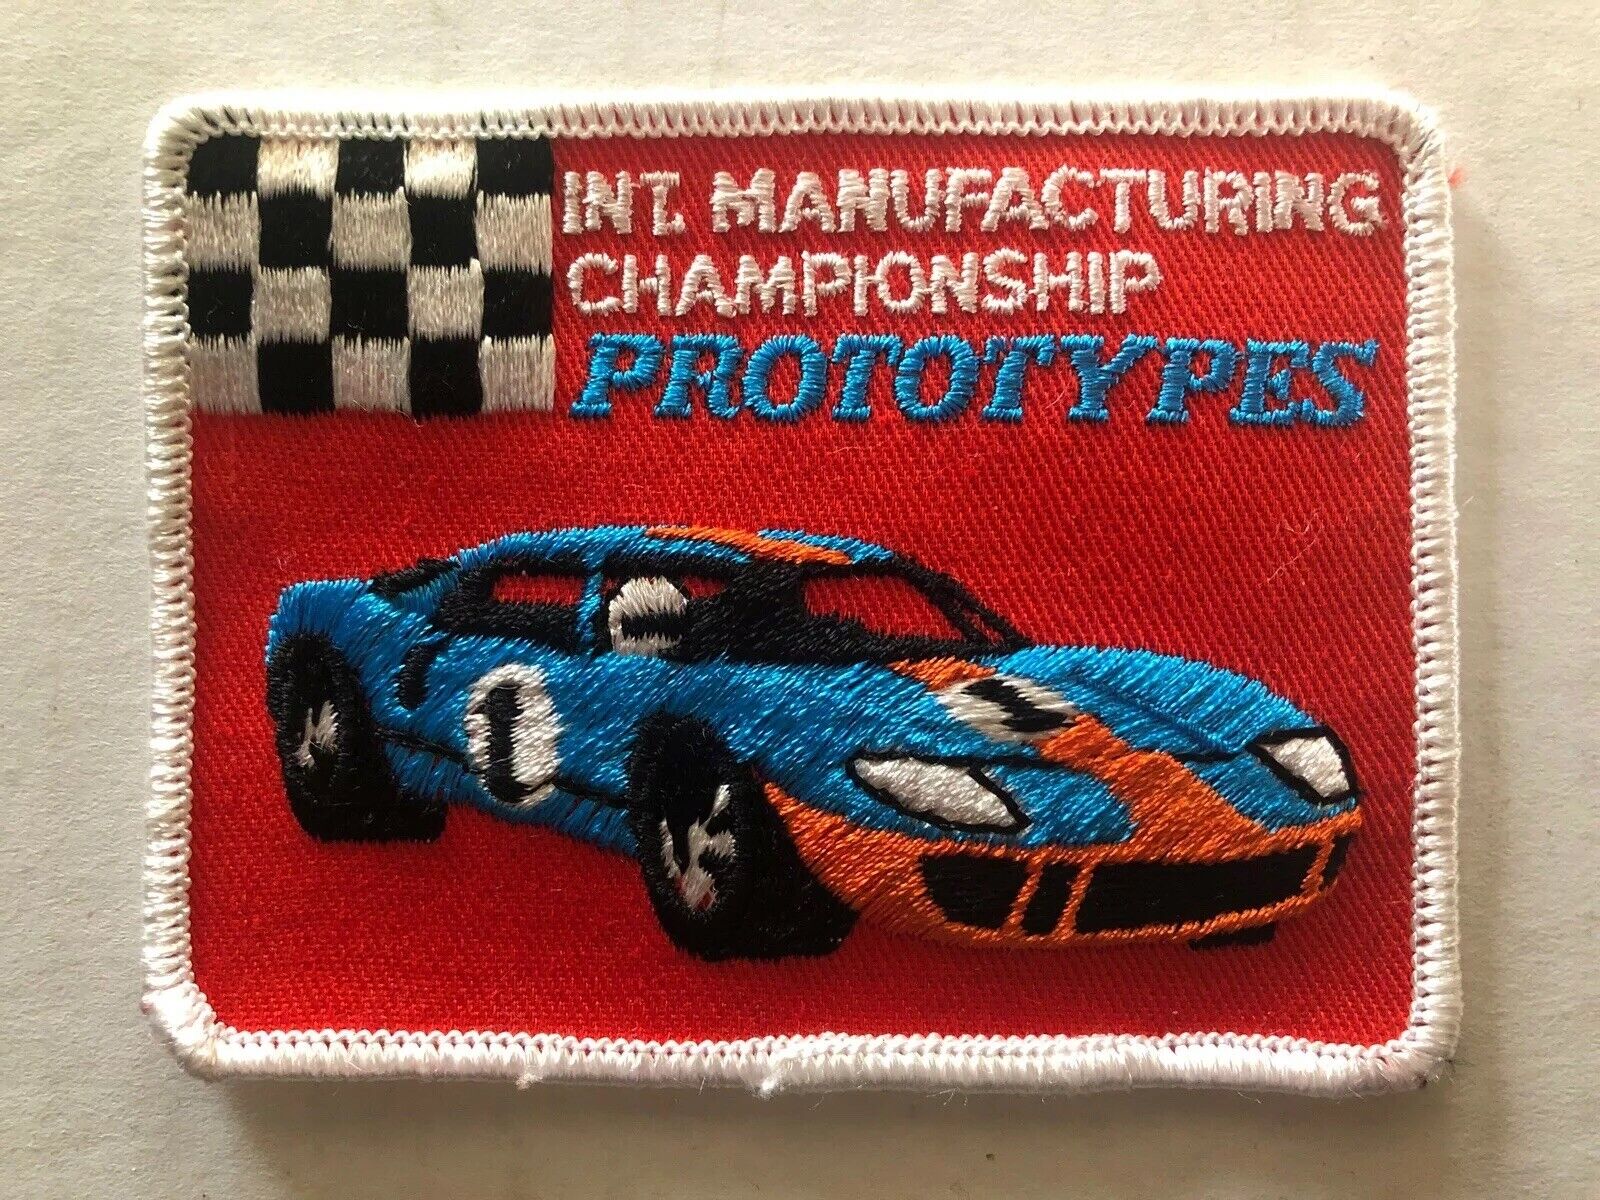 Prototypes International Manufacturing Championship Vintage Patch Ford GT Race